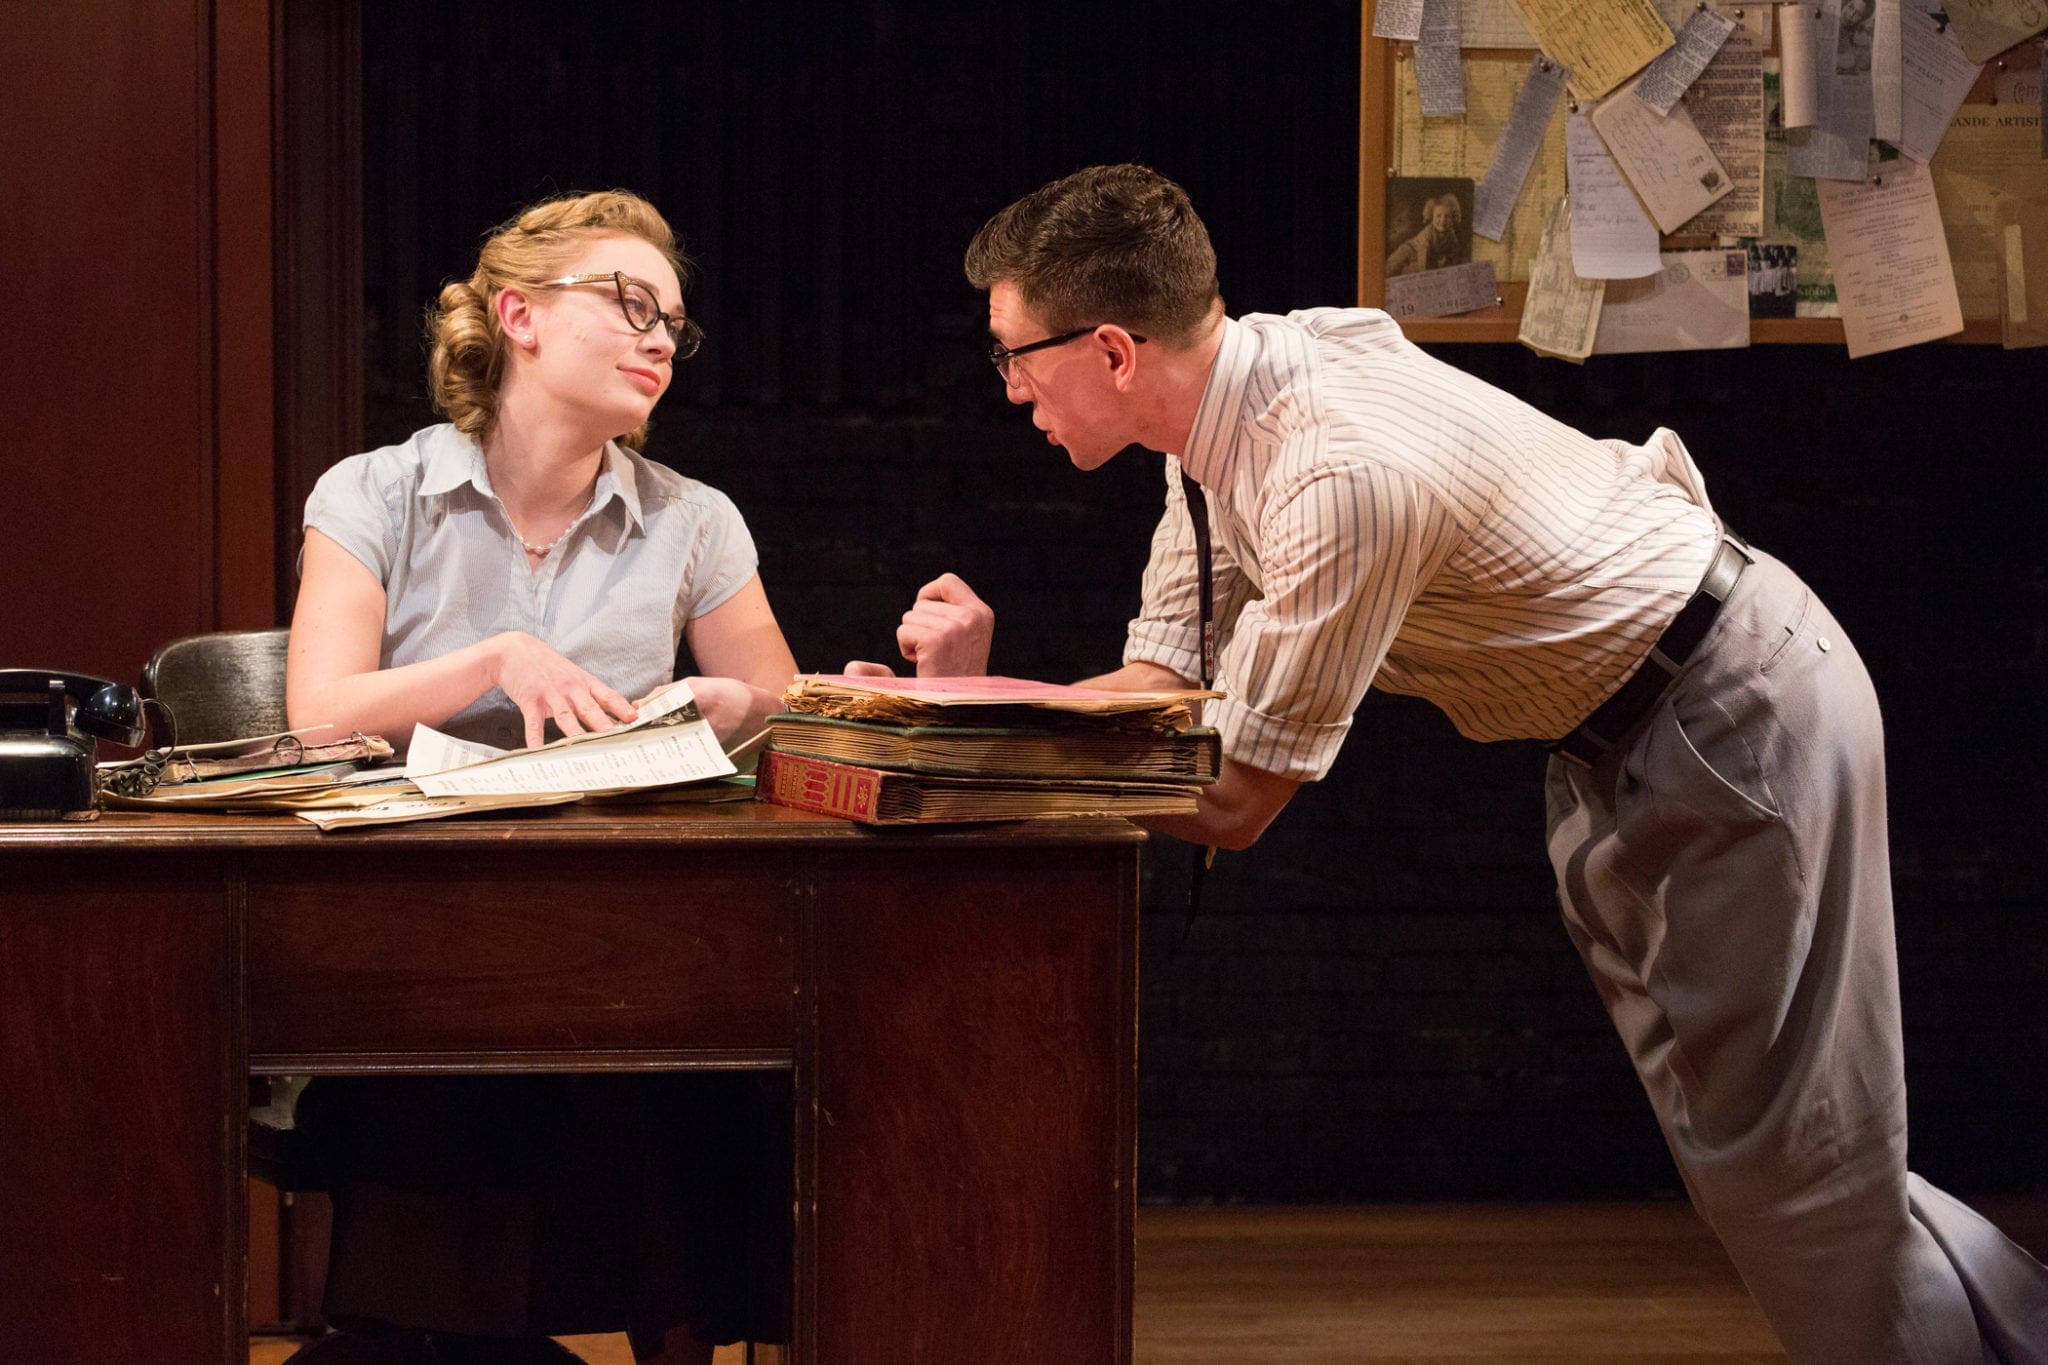 Emilie Krause as Katherine Sherman and Brian Cowden as Nathan Wise. Photo by Mark Garvin.